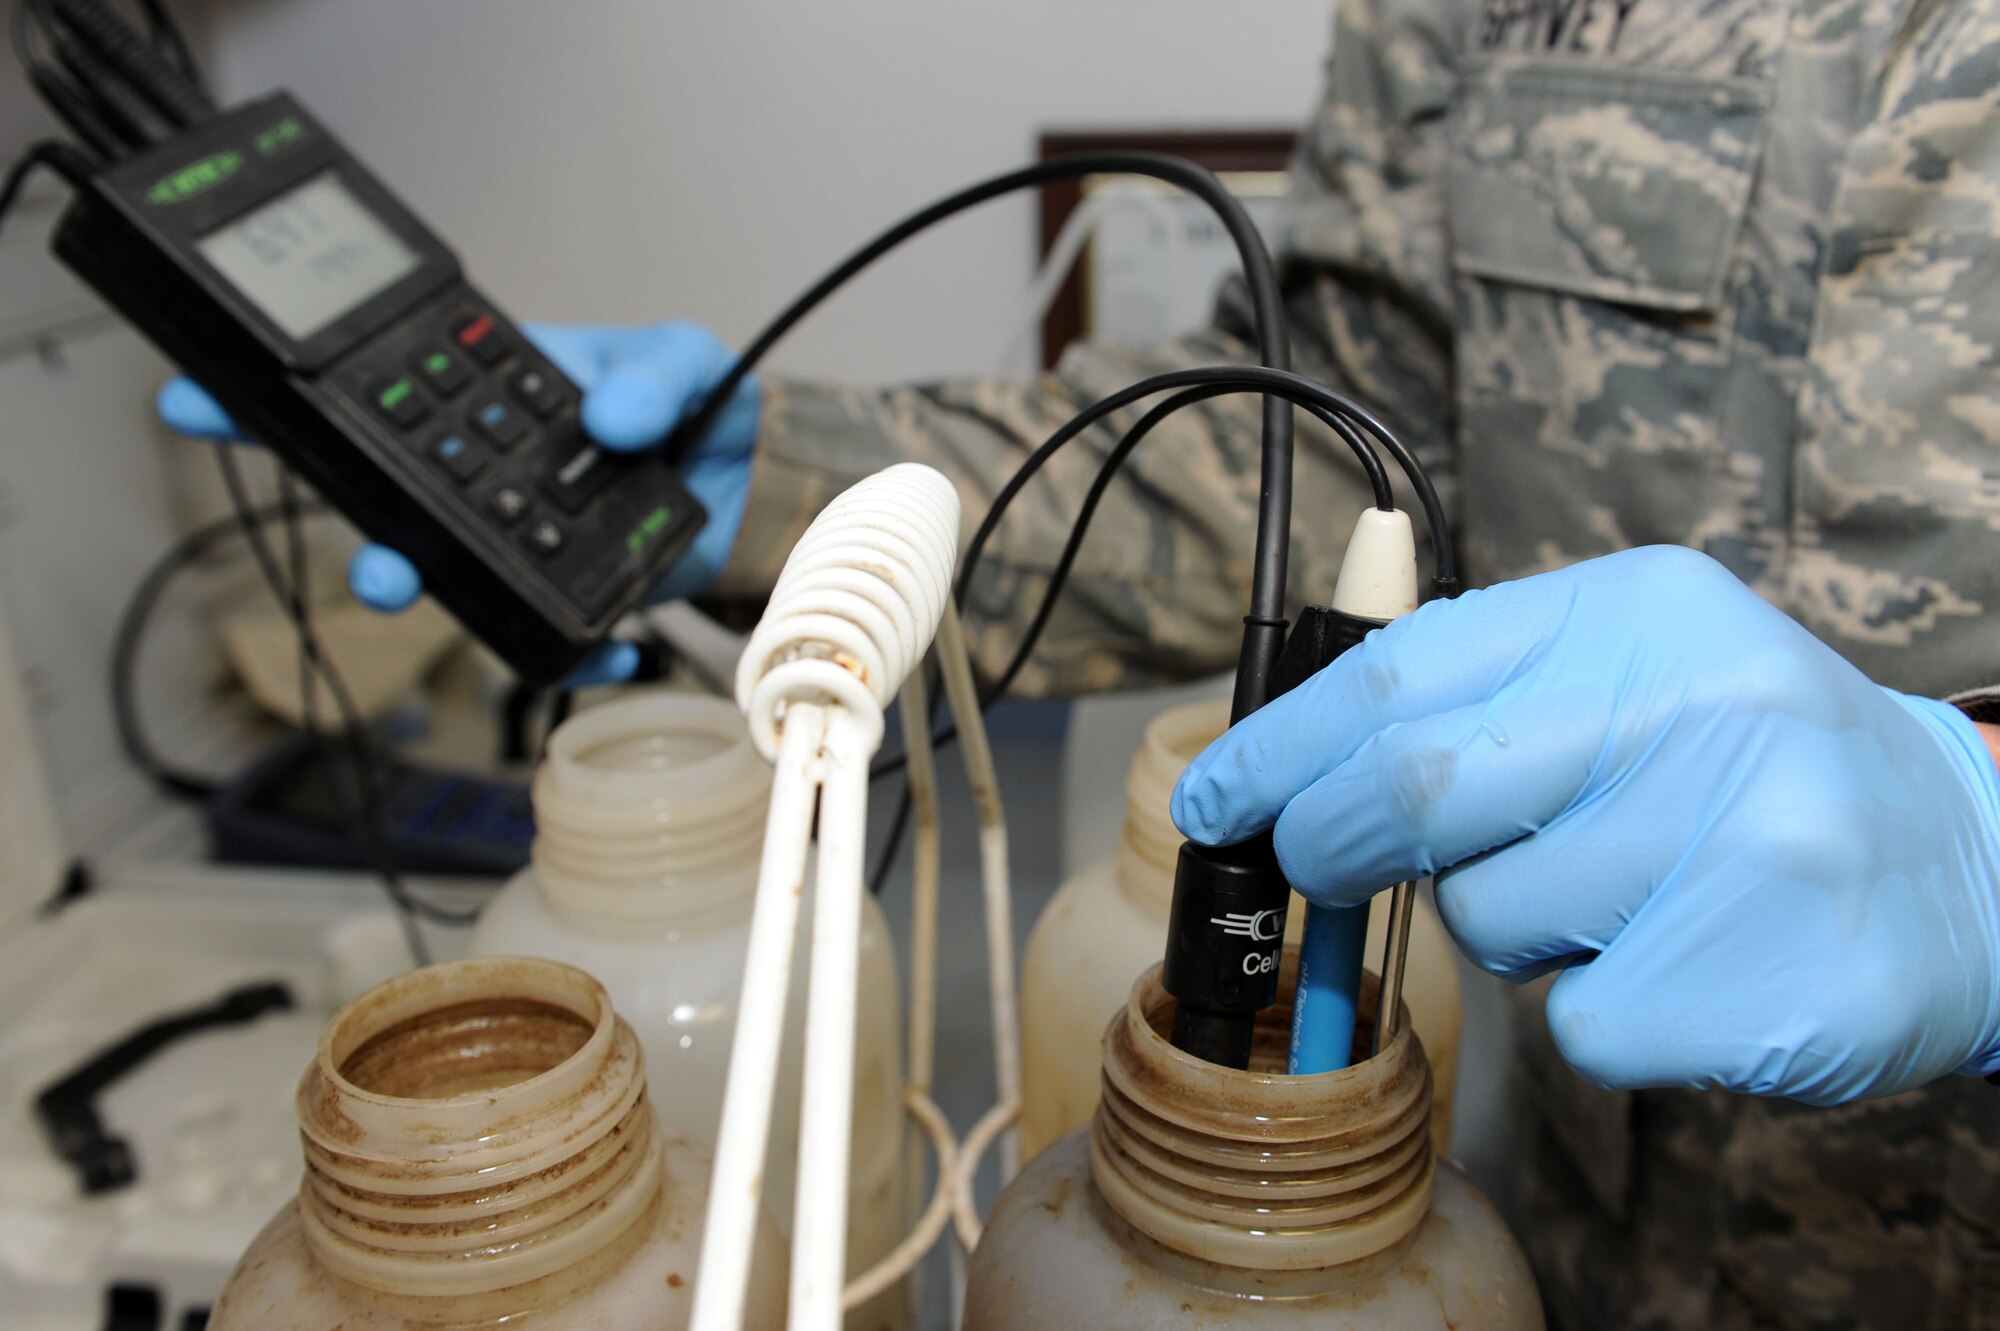 SPANGDAHLEM AIR BASE, Germany –Senior Airman David Spivey, 52nd Civil Engineer Squadron water and fuels system maintenance technician, uses a meter to check the chemical level and temperature of a sample of wastewater during a daily inspection at the wastewater treatment facility here Sept. 5. Samples are taken daily from every stage of the treatment process to ensure they meet German environmental standards. The facility processes wastewater from the base to remove any hazardous chemicals it may contain before it is released back into the environment. (U.S. Air Force photo by Senior Airman Christopher Toon/Released)